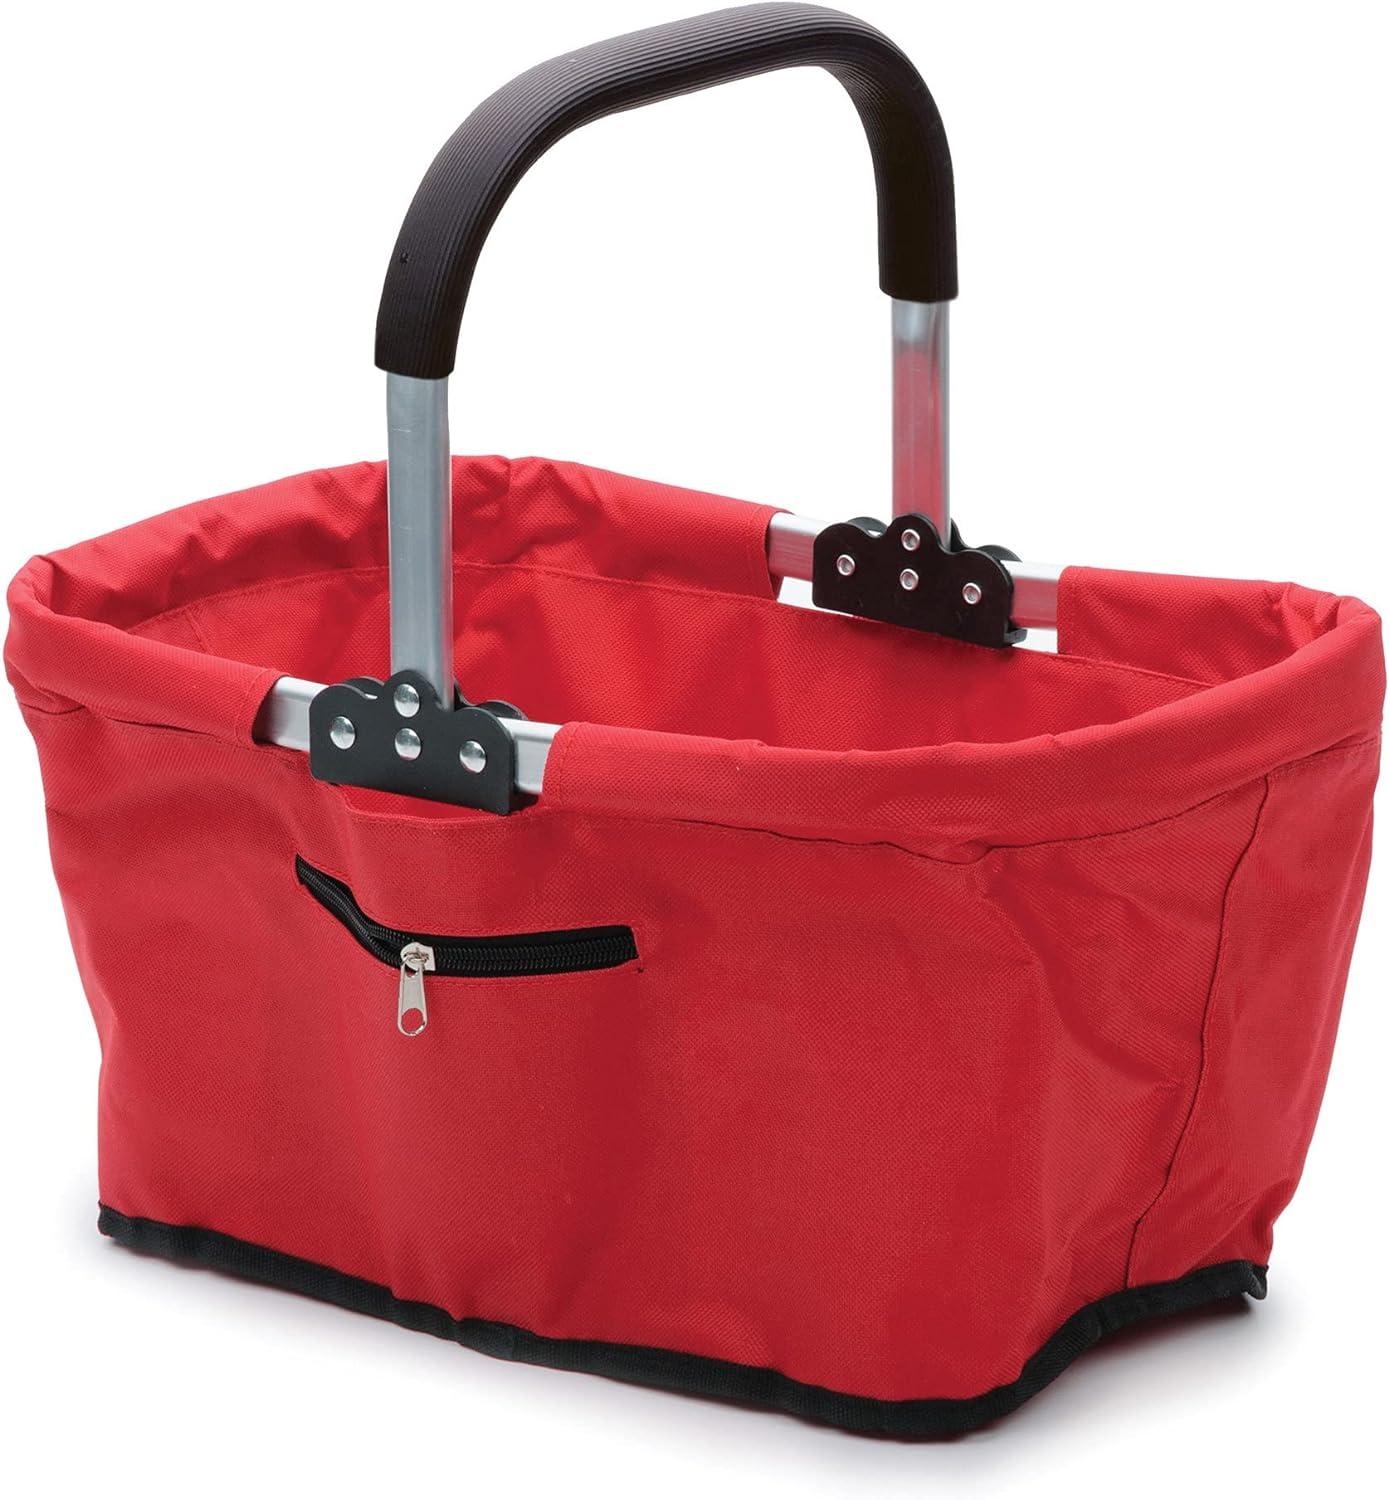 GatherMate Collapsible Red Polyester Market Basket with Aluminum Frame